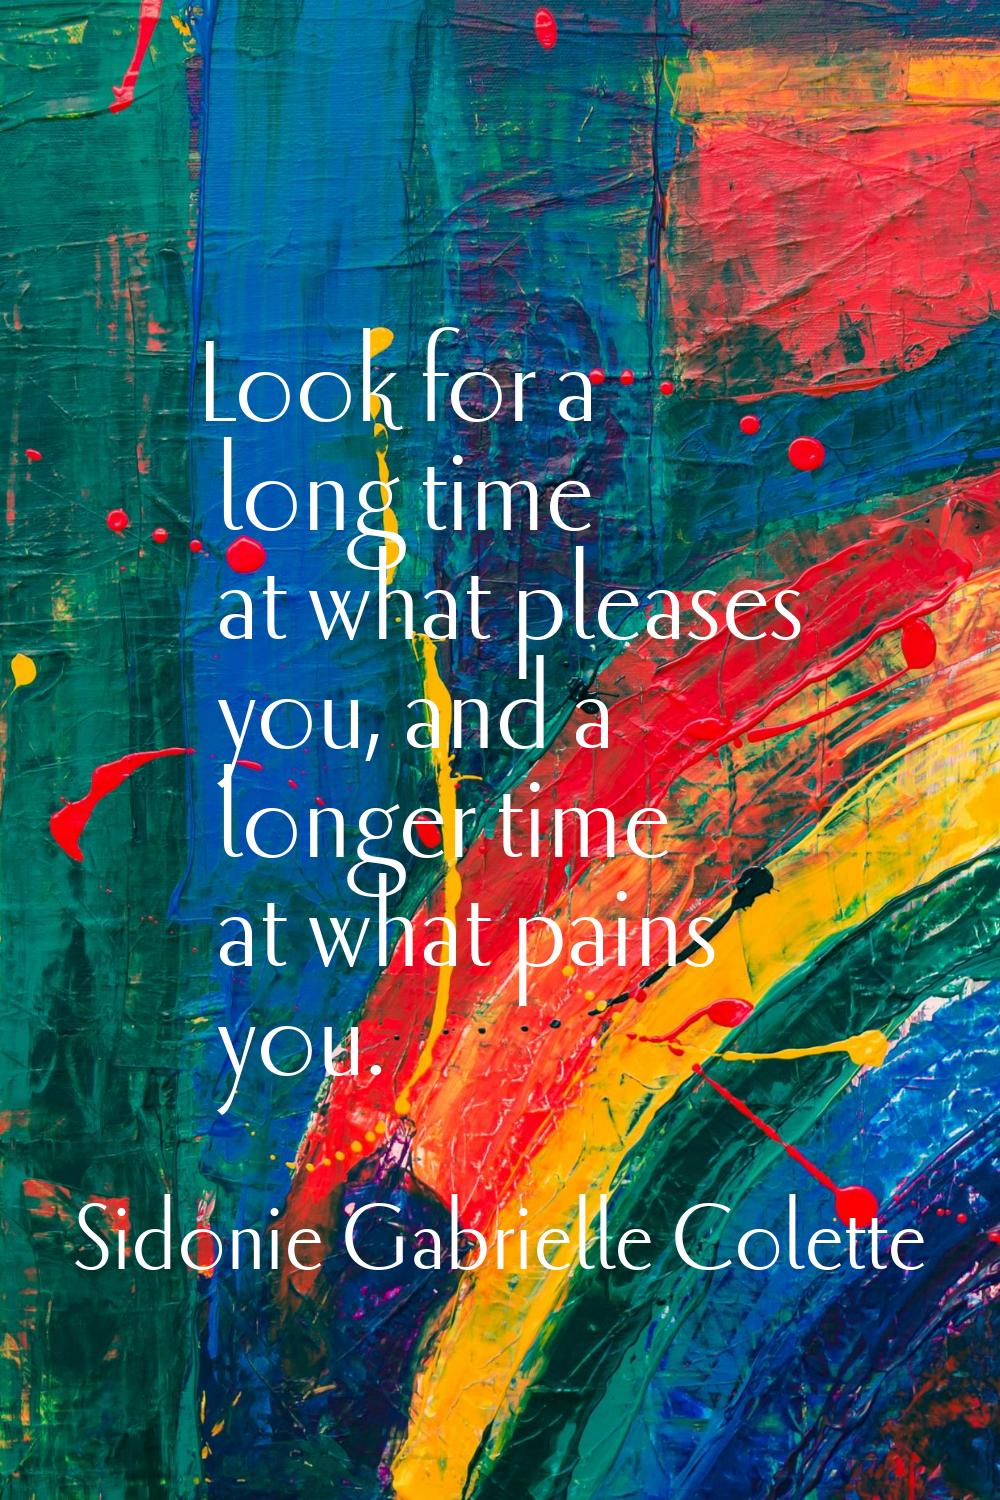 Look for a long time at what pleases you, and a longer time at what pains you.